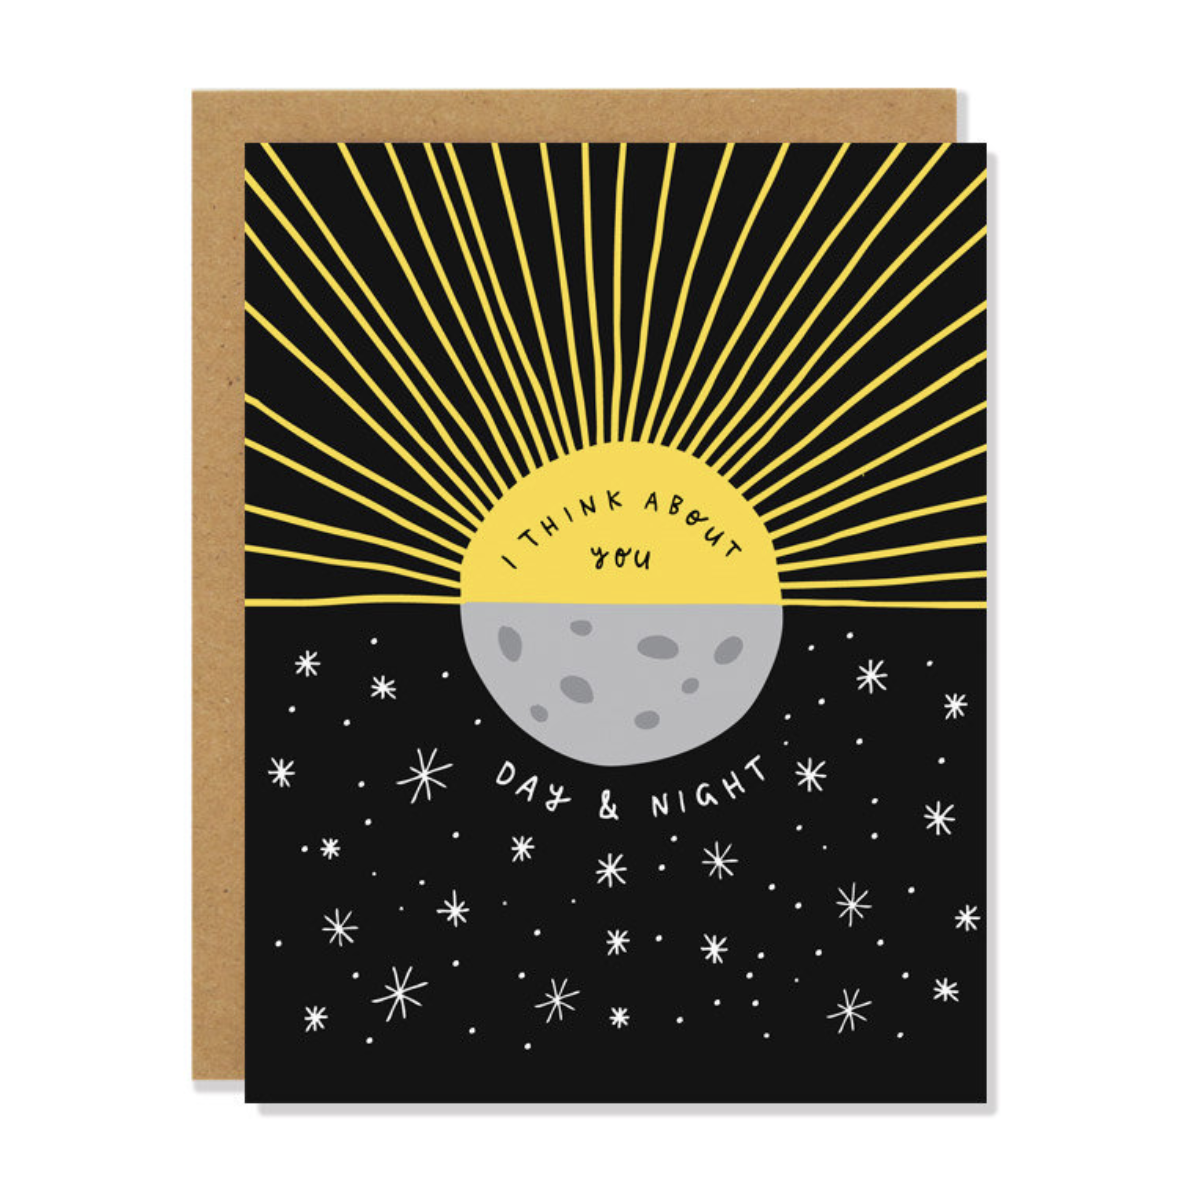 I Think About You Day and Night Greeting Card